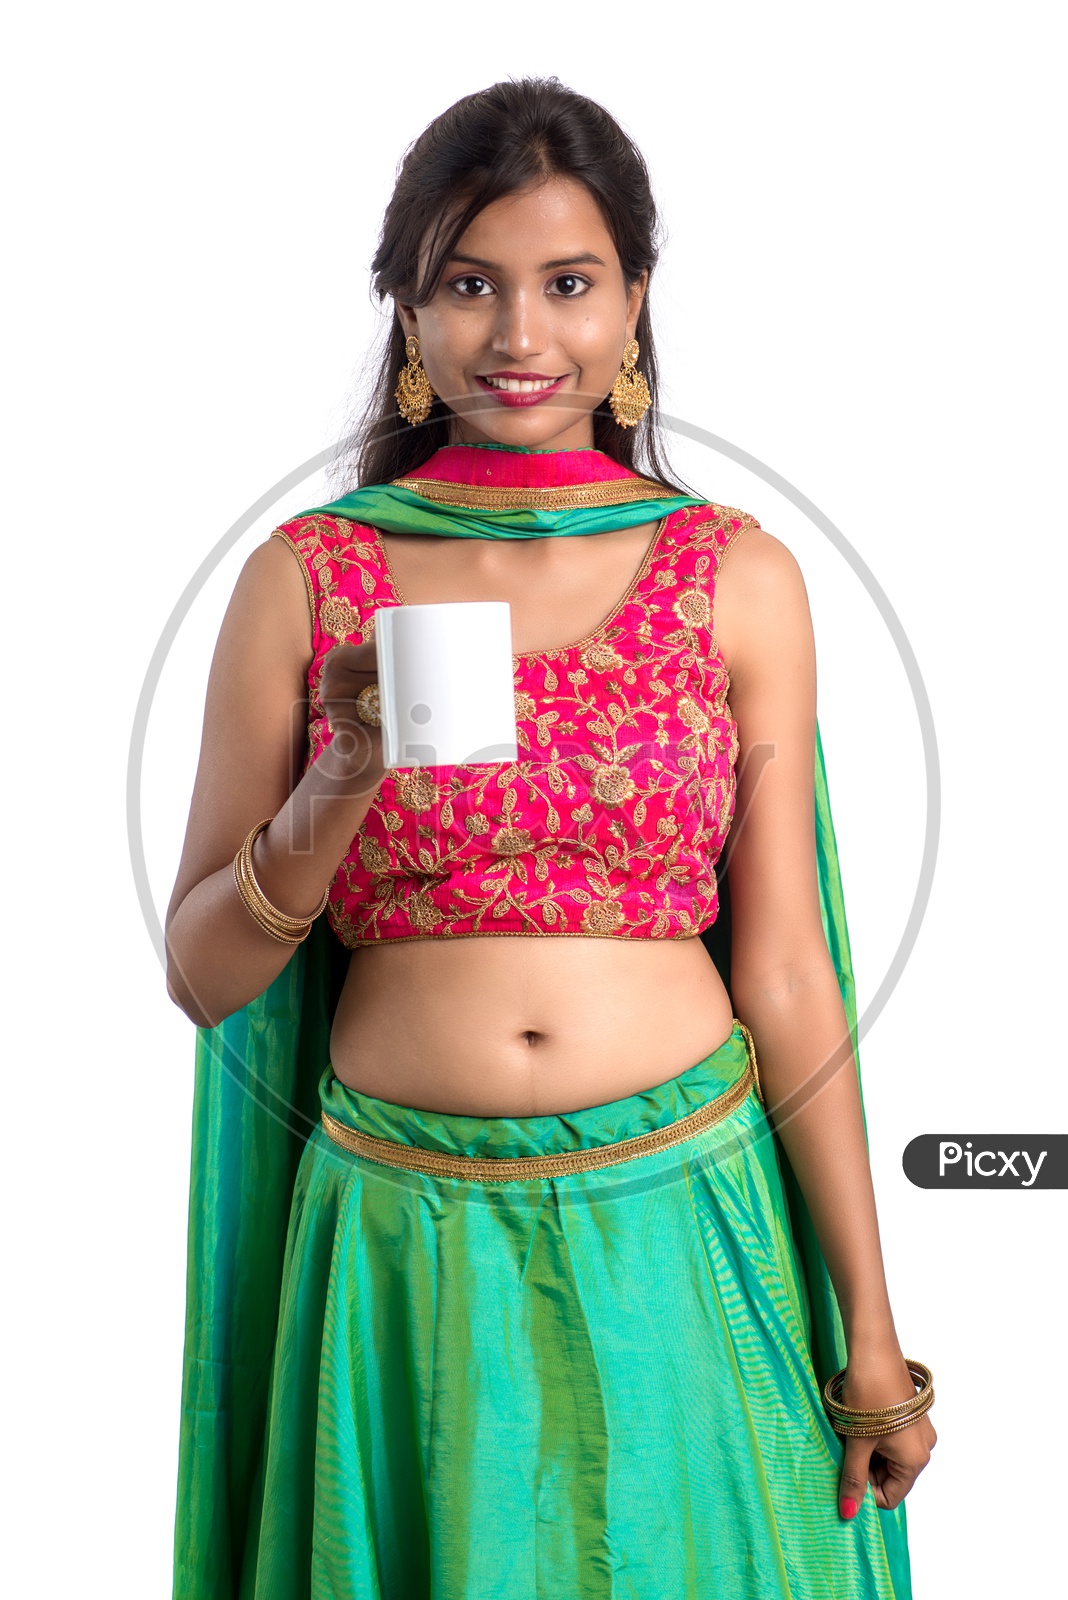 Portrait Of a Young Indian  Traditional Girl Enjoying a Cup of Tea Or Coffee Over a White Background